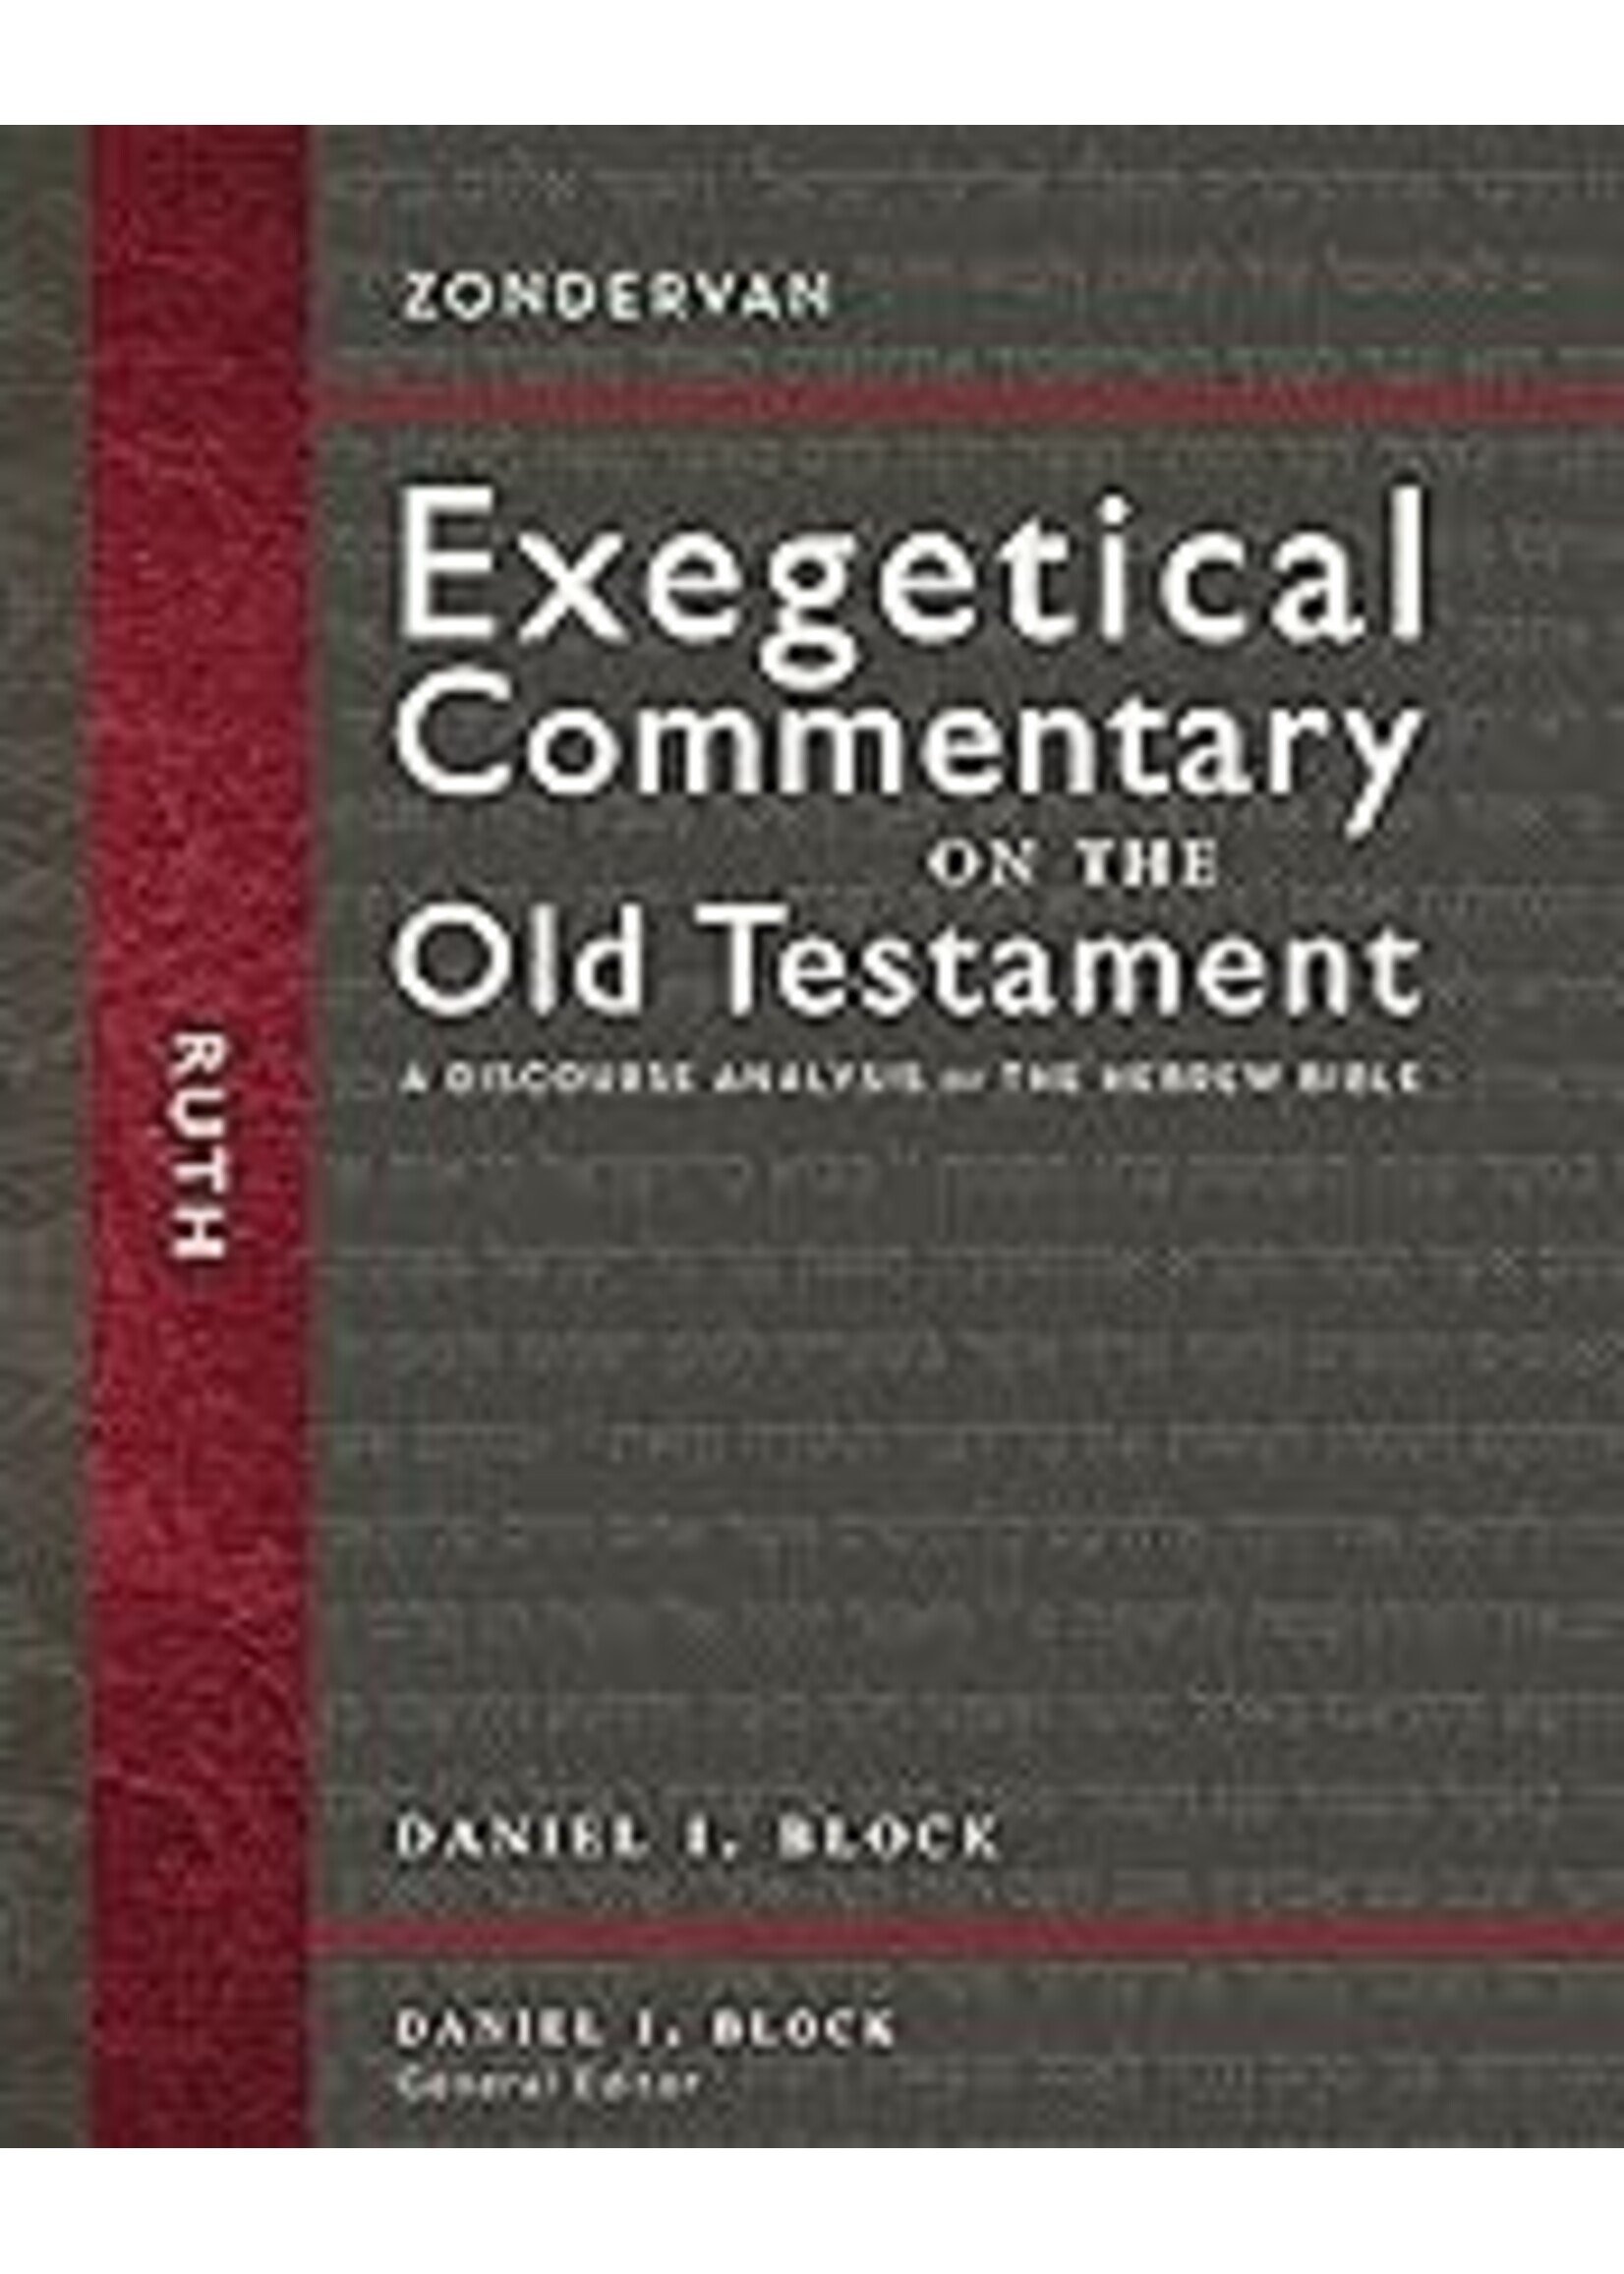 Ruth Exegetical Commentary on the Old Testament